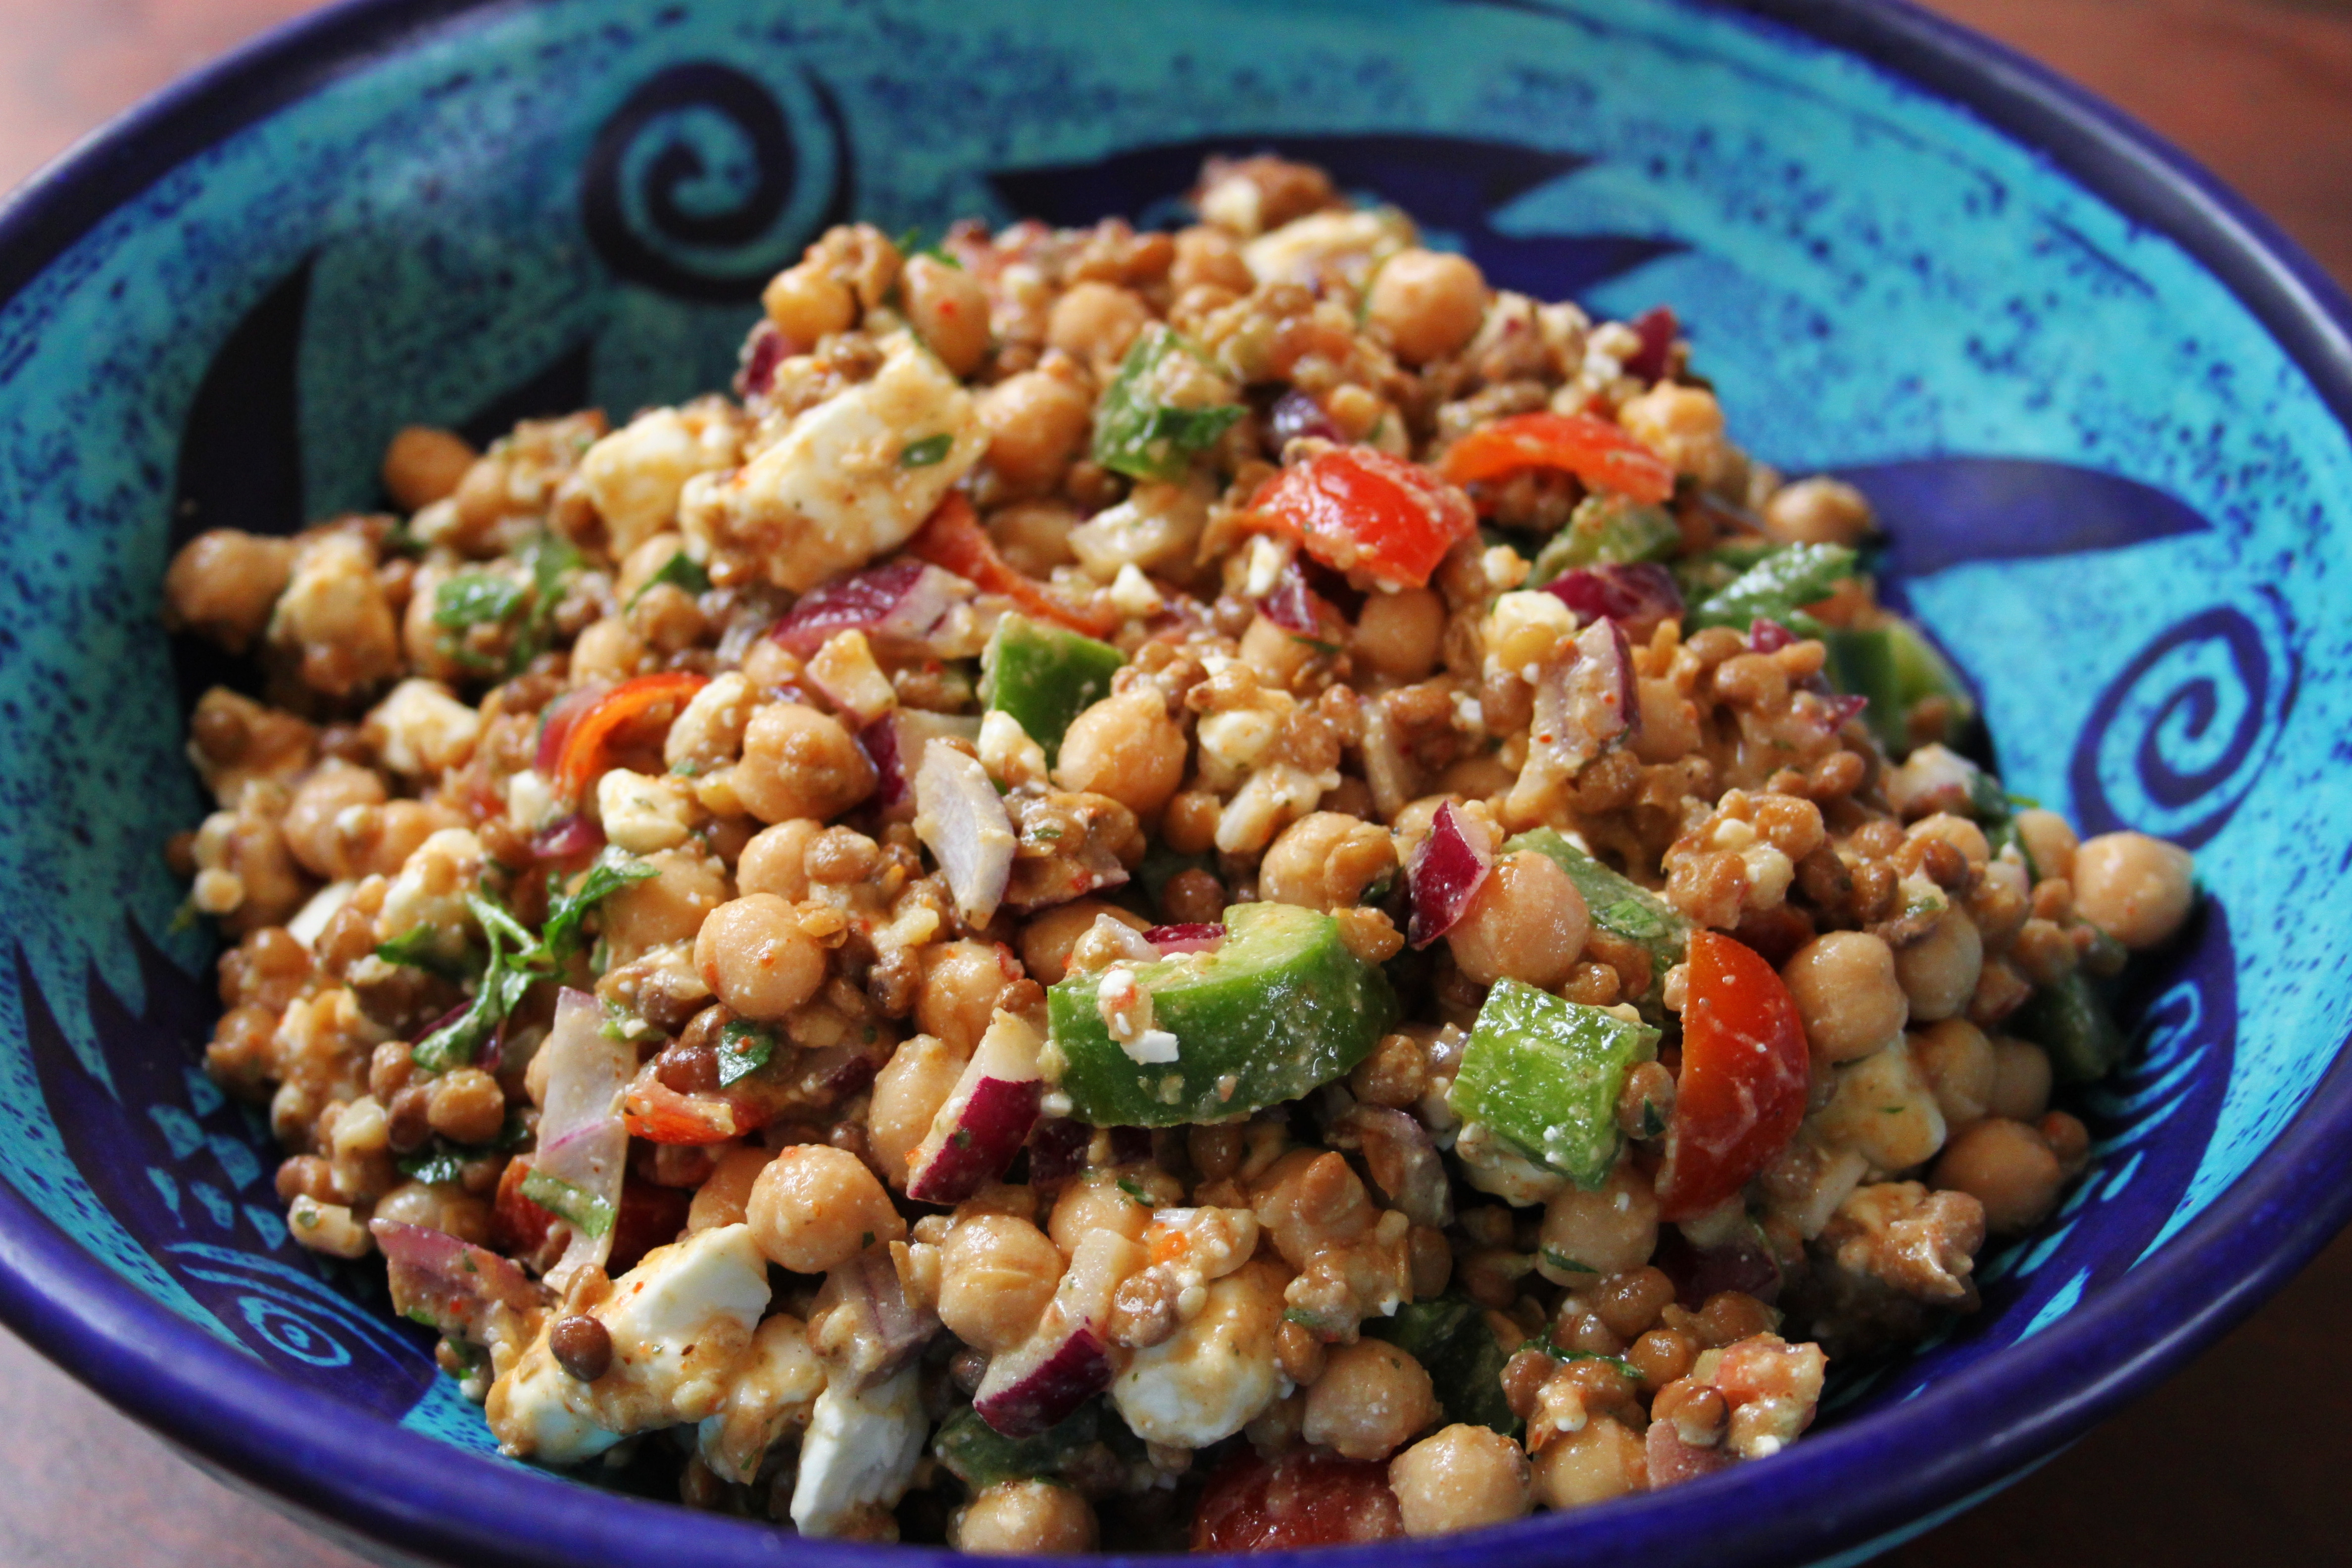 Delicious Healthy Vegetarian Recipes
 Today’s healthy and delicious lunch idea Chickpea lentil